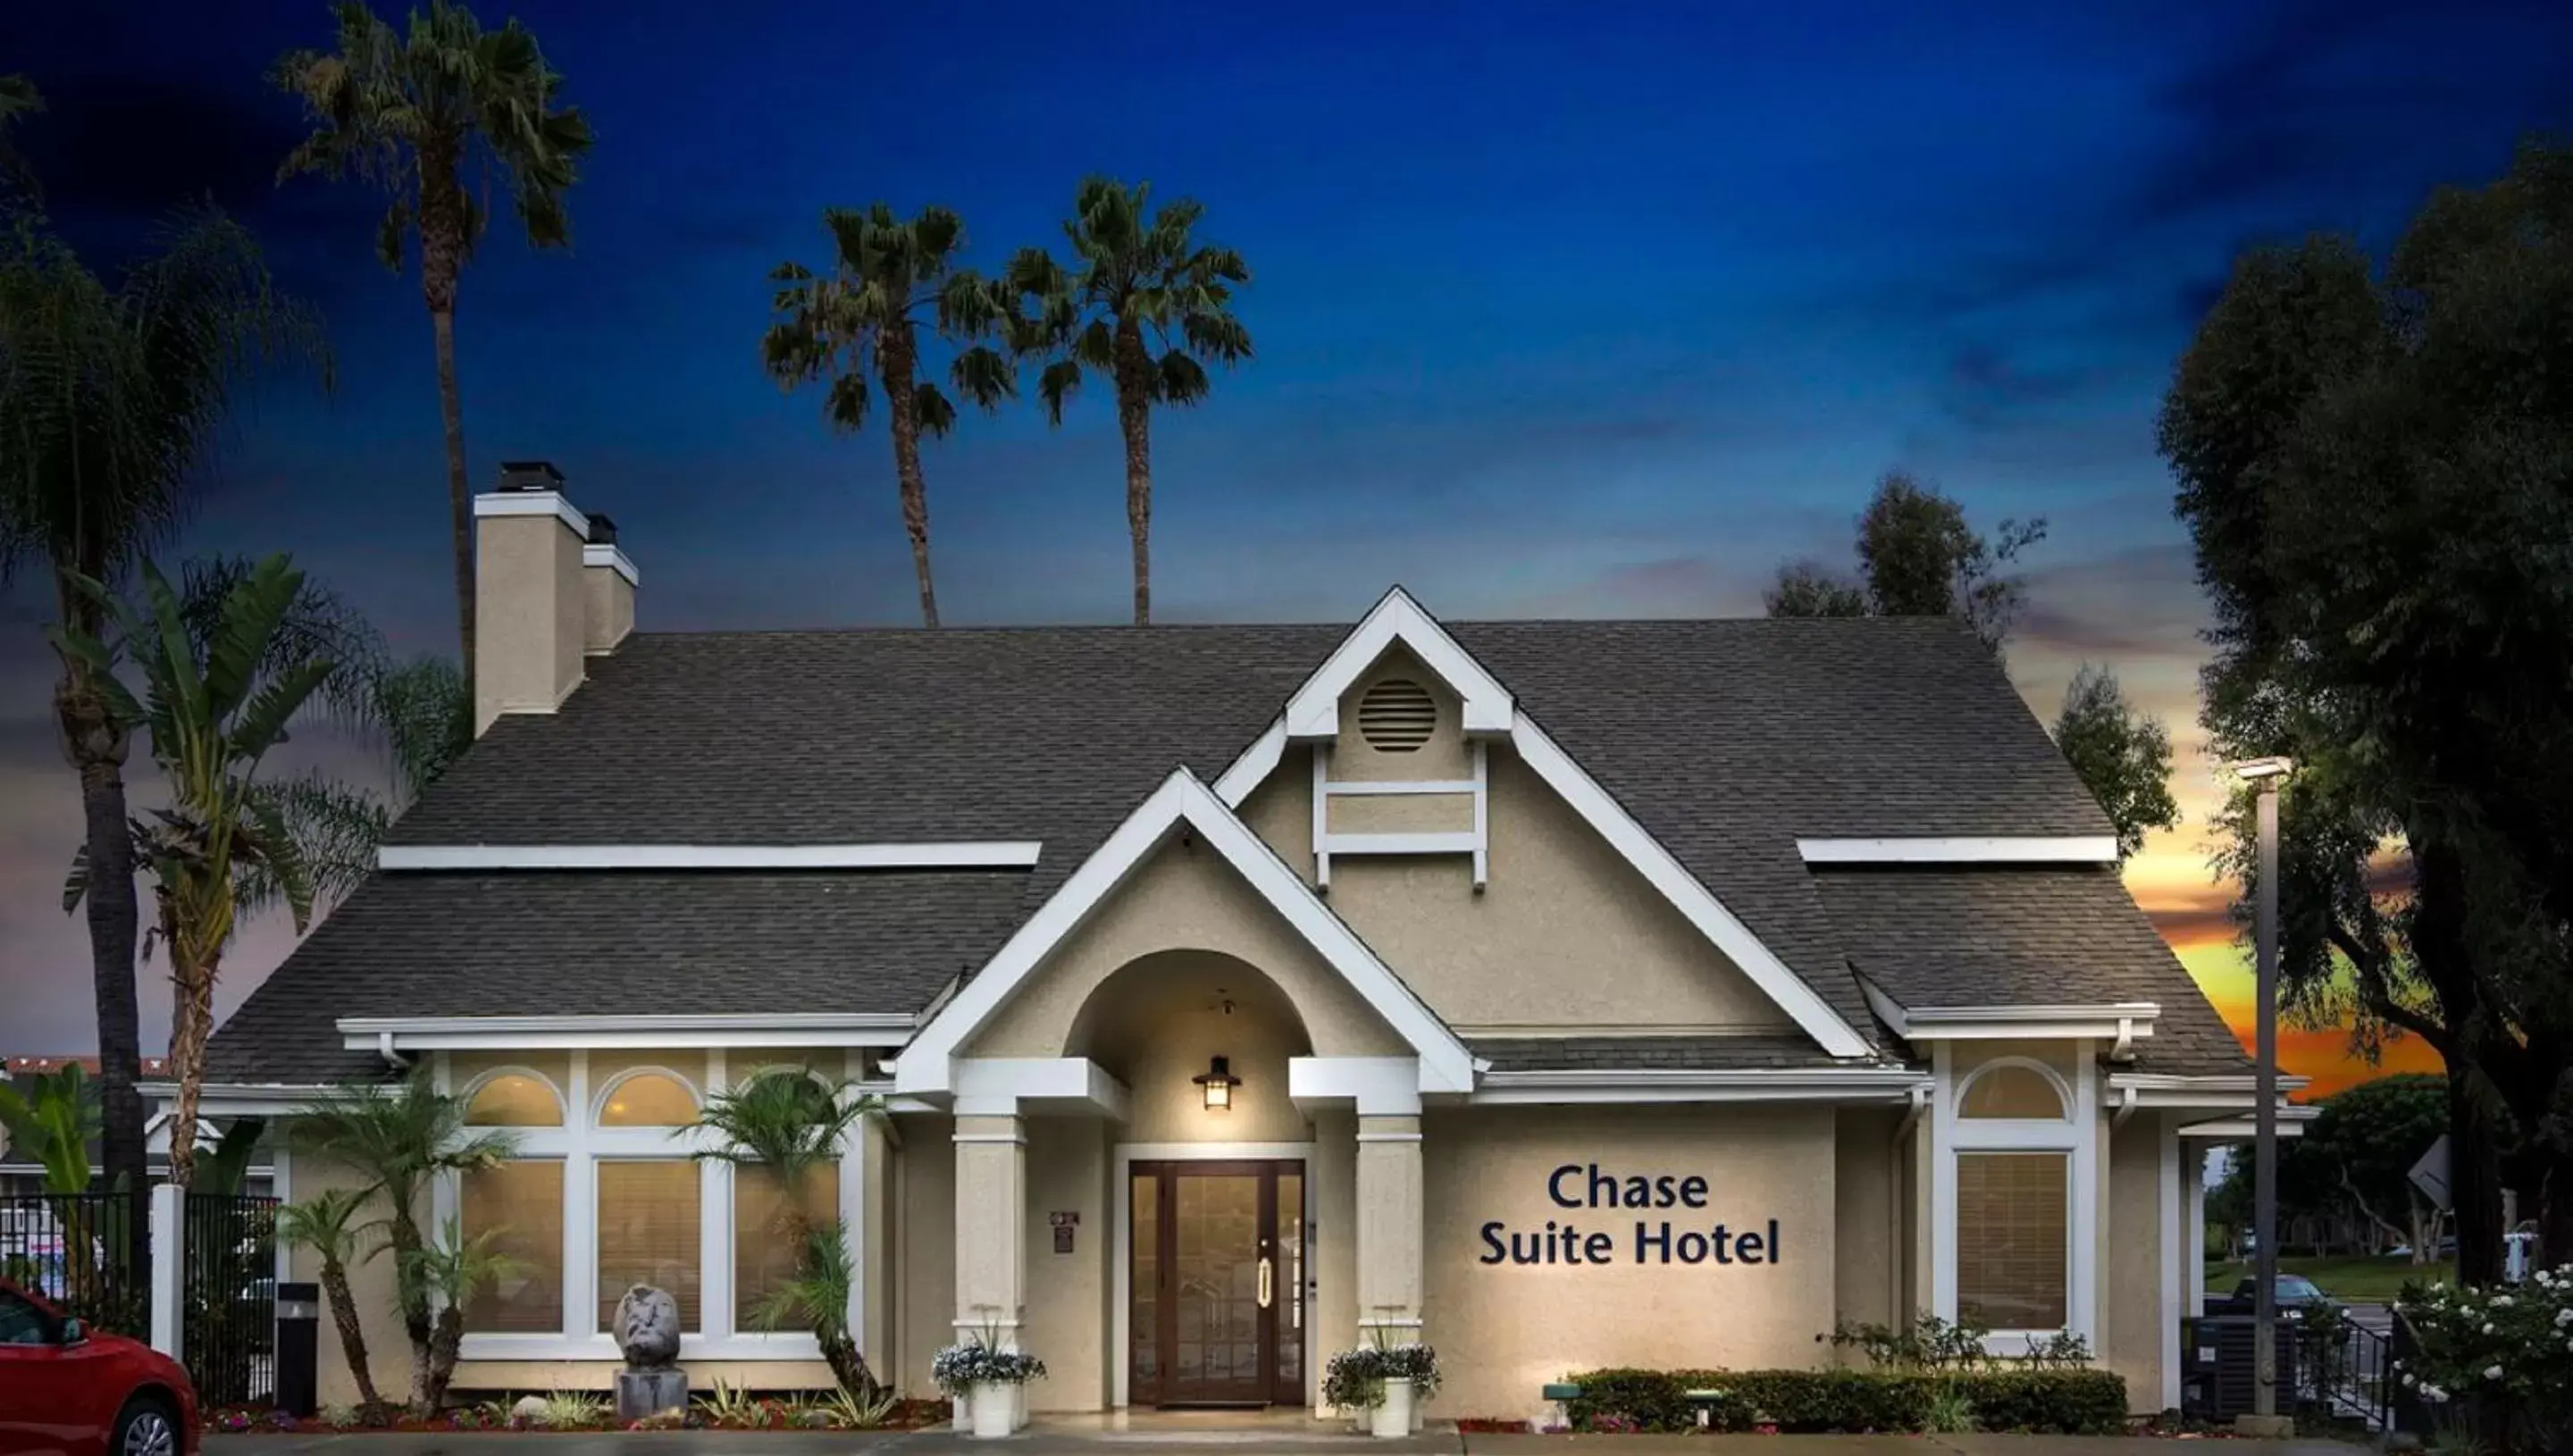 Property Building in Chase Suites Brea-Fullerton - North Orange County